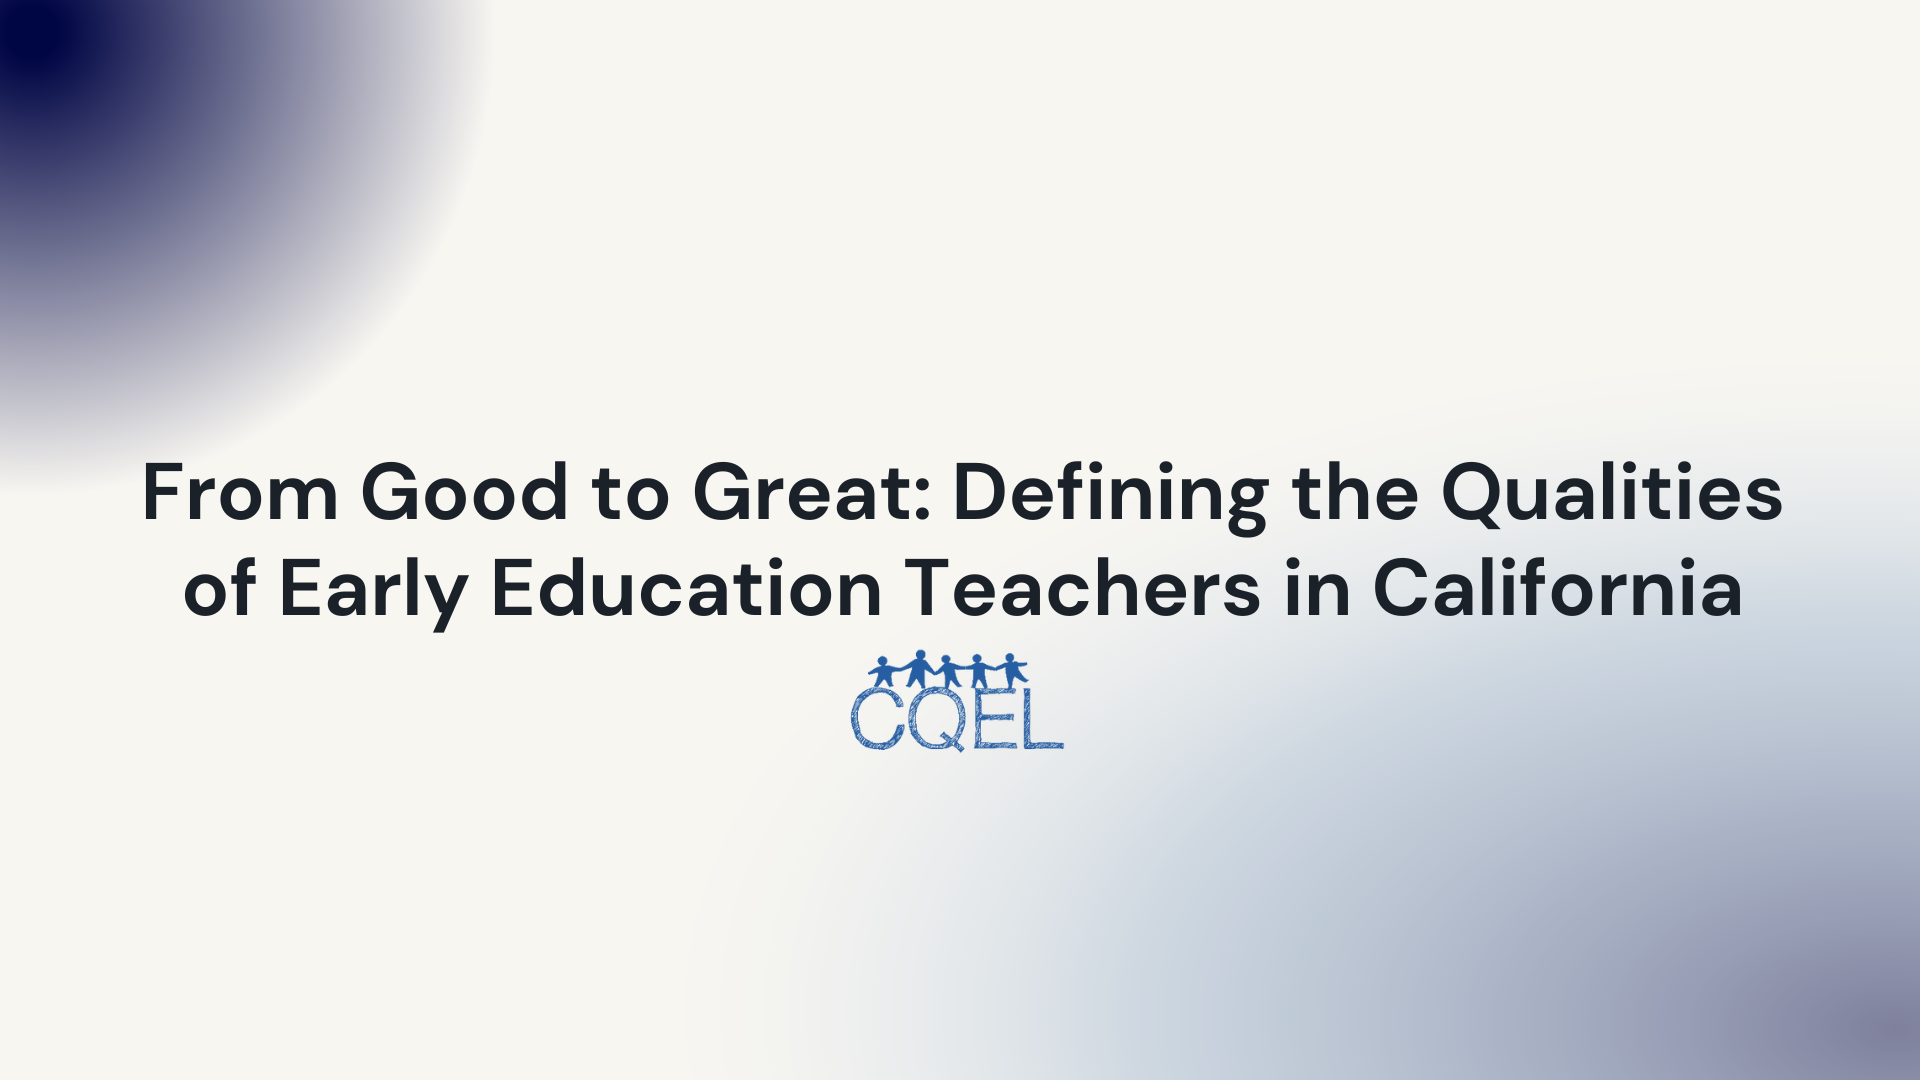 From Good to Great: Defining the Qualities of Early Education Teachers in California